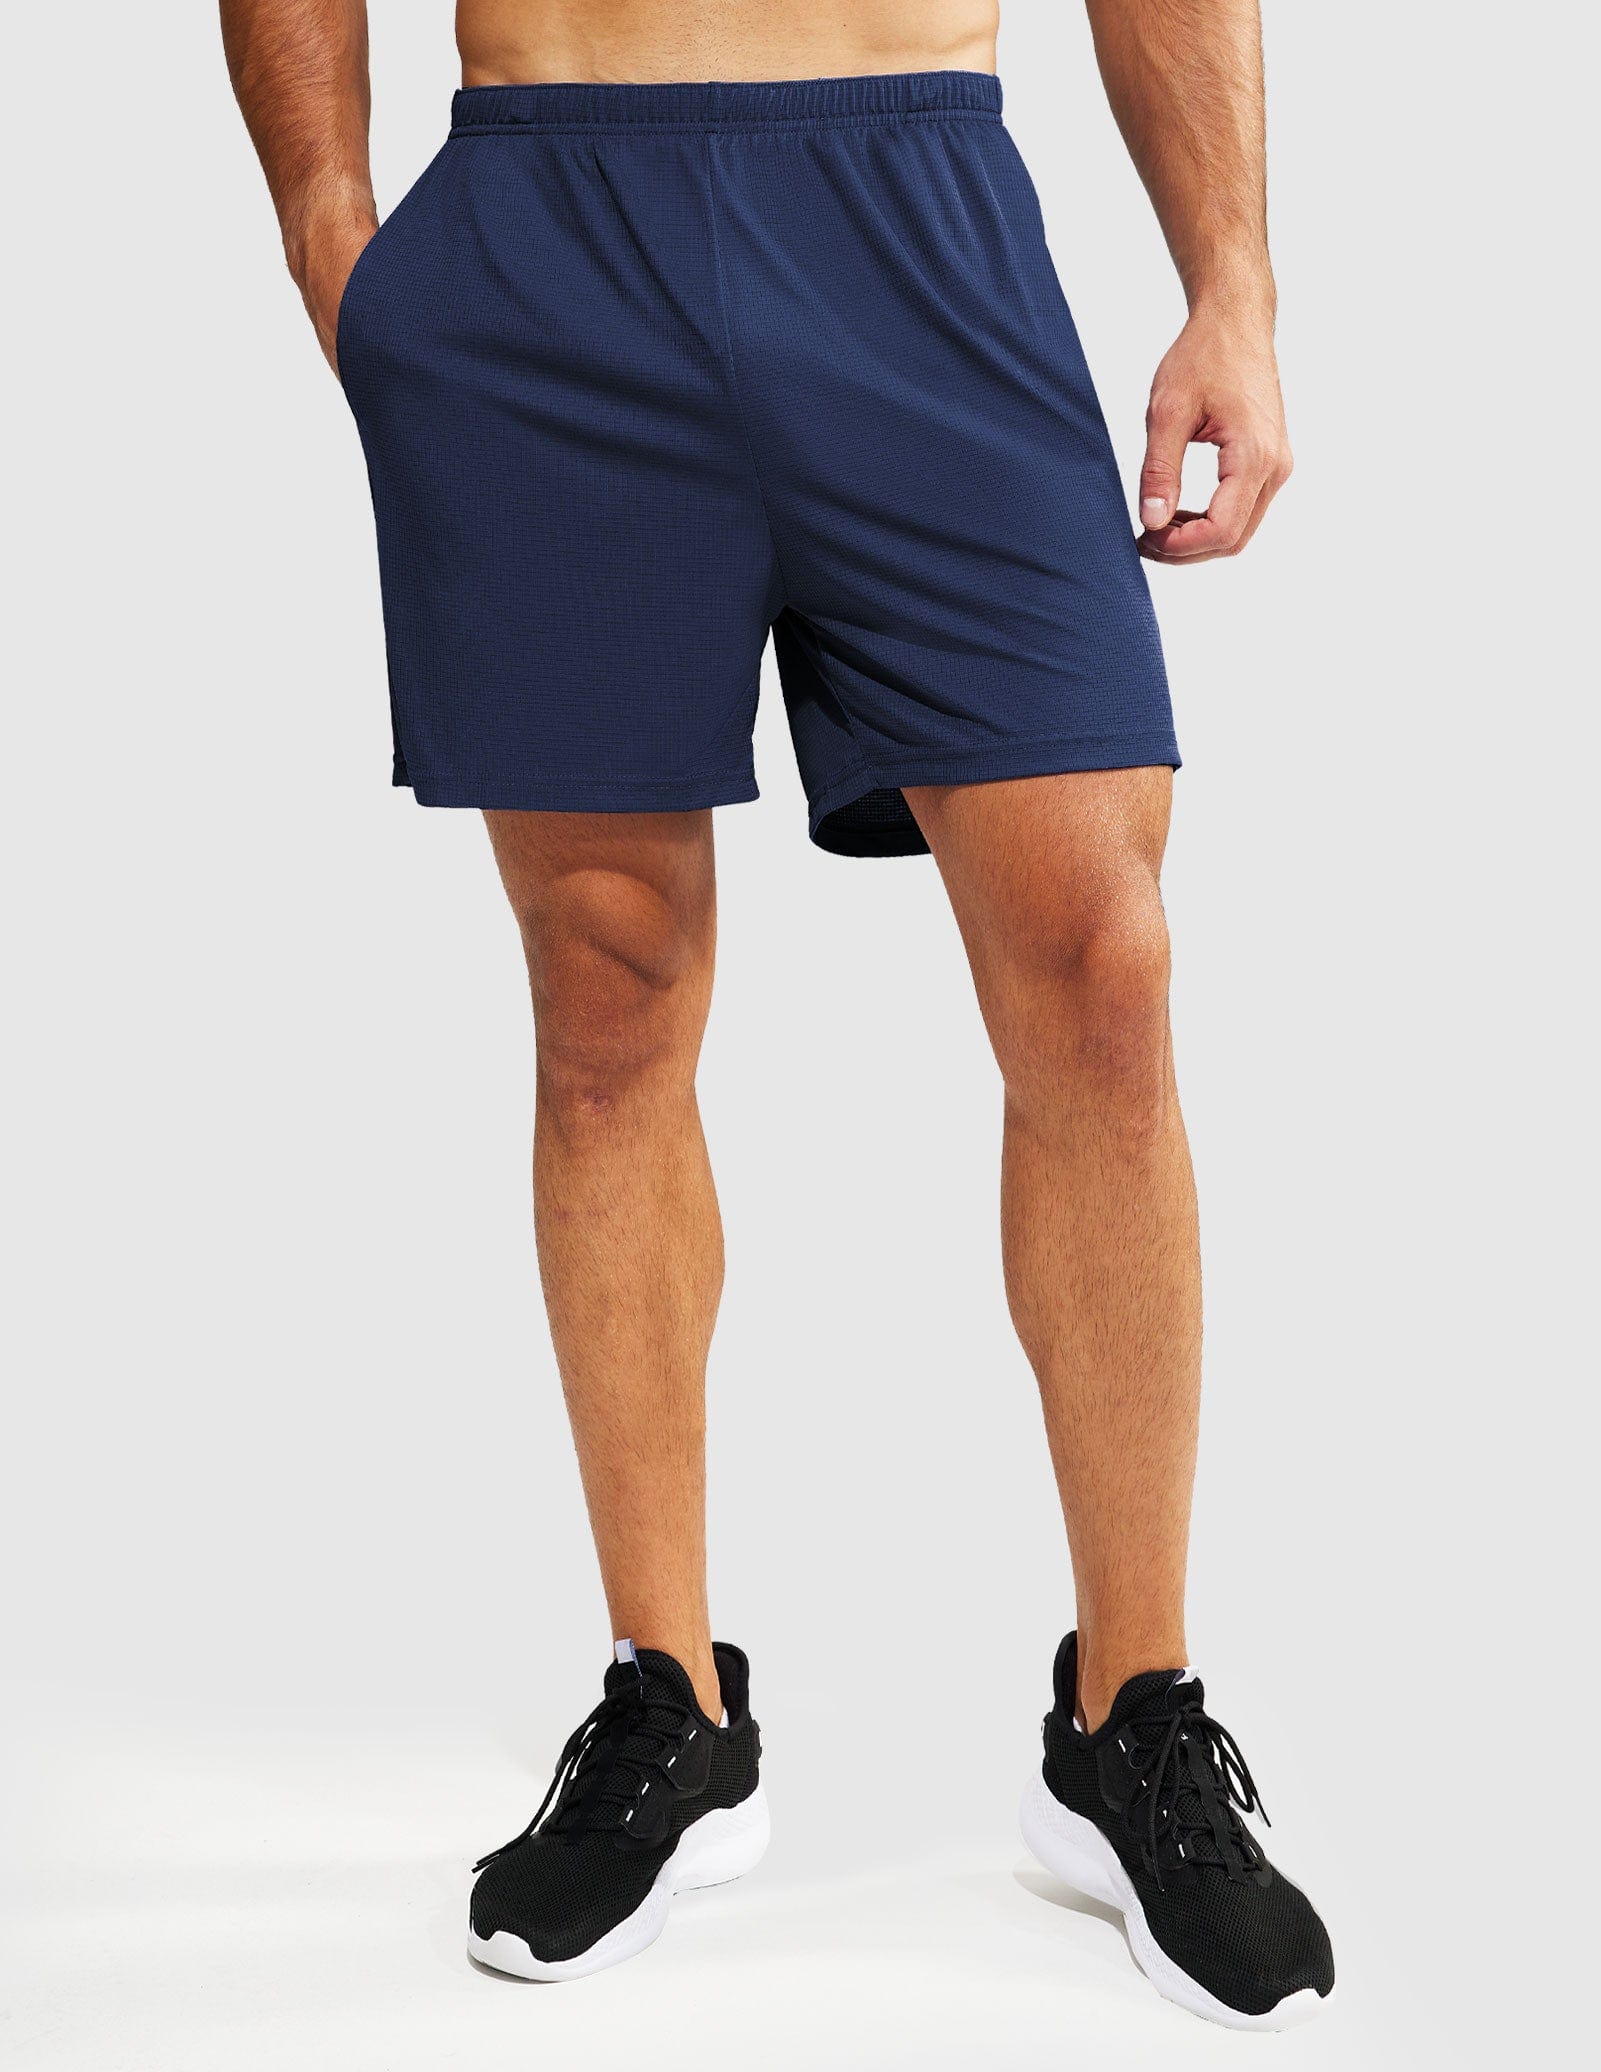 Men's 5-Inch Running Shorts Quick Dry with Pockets & Liner - Dark Blue / XS